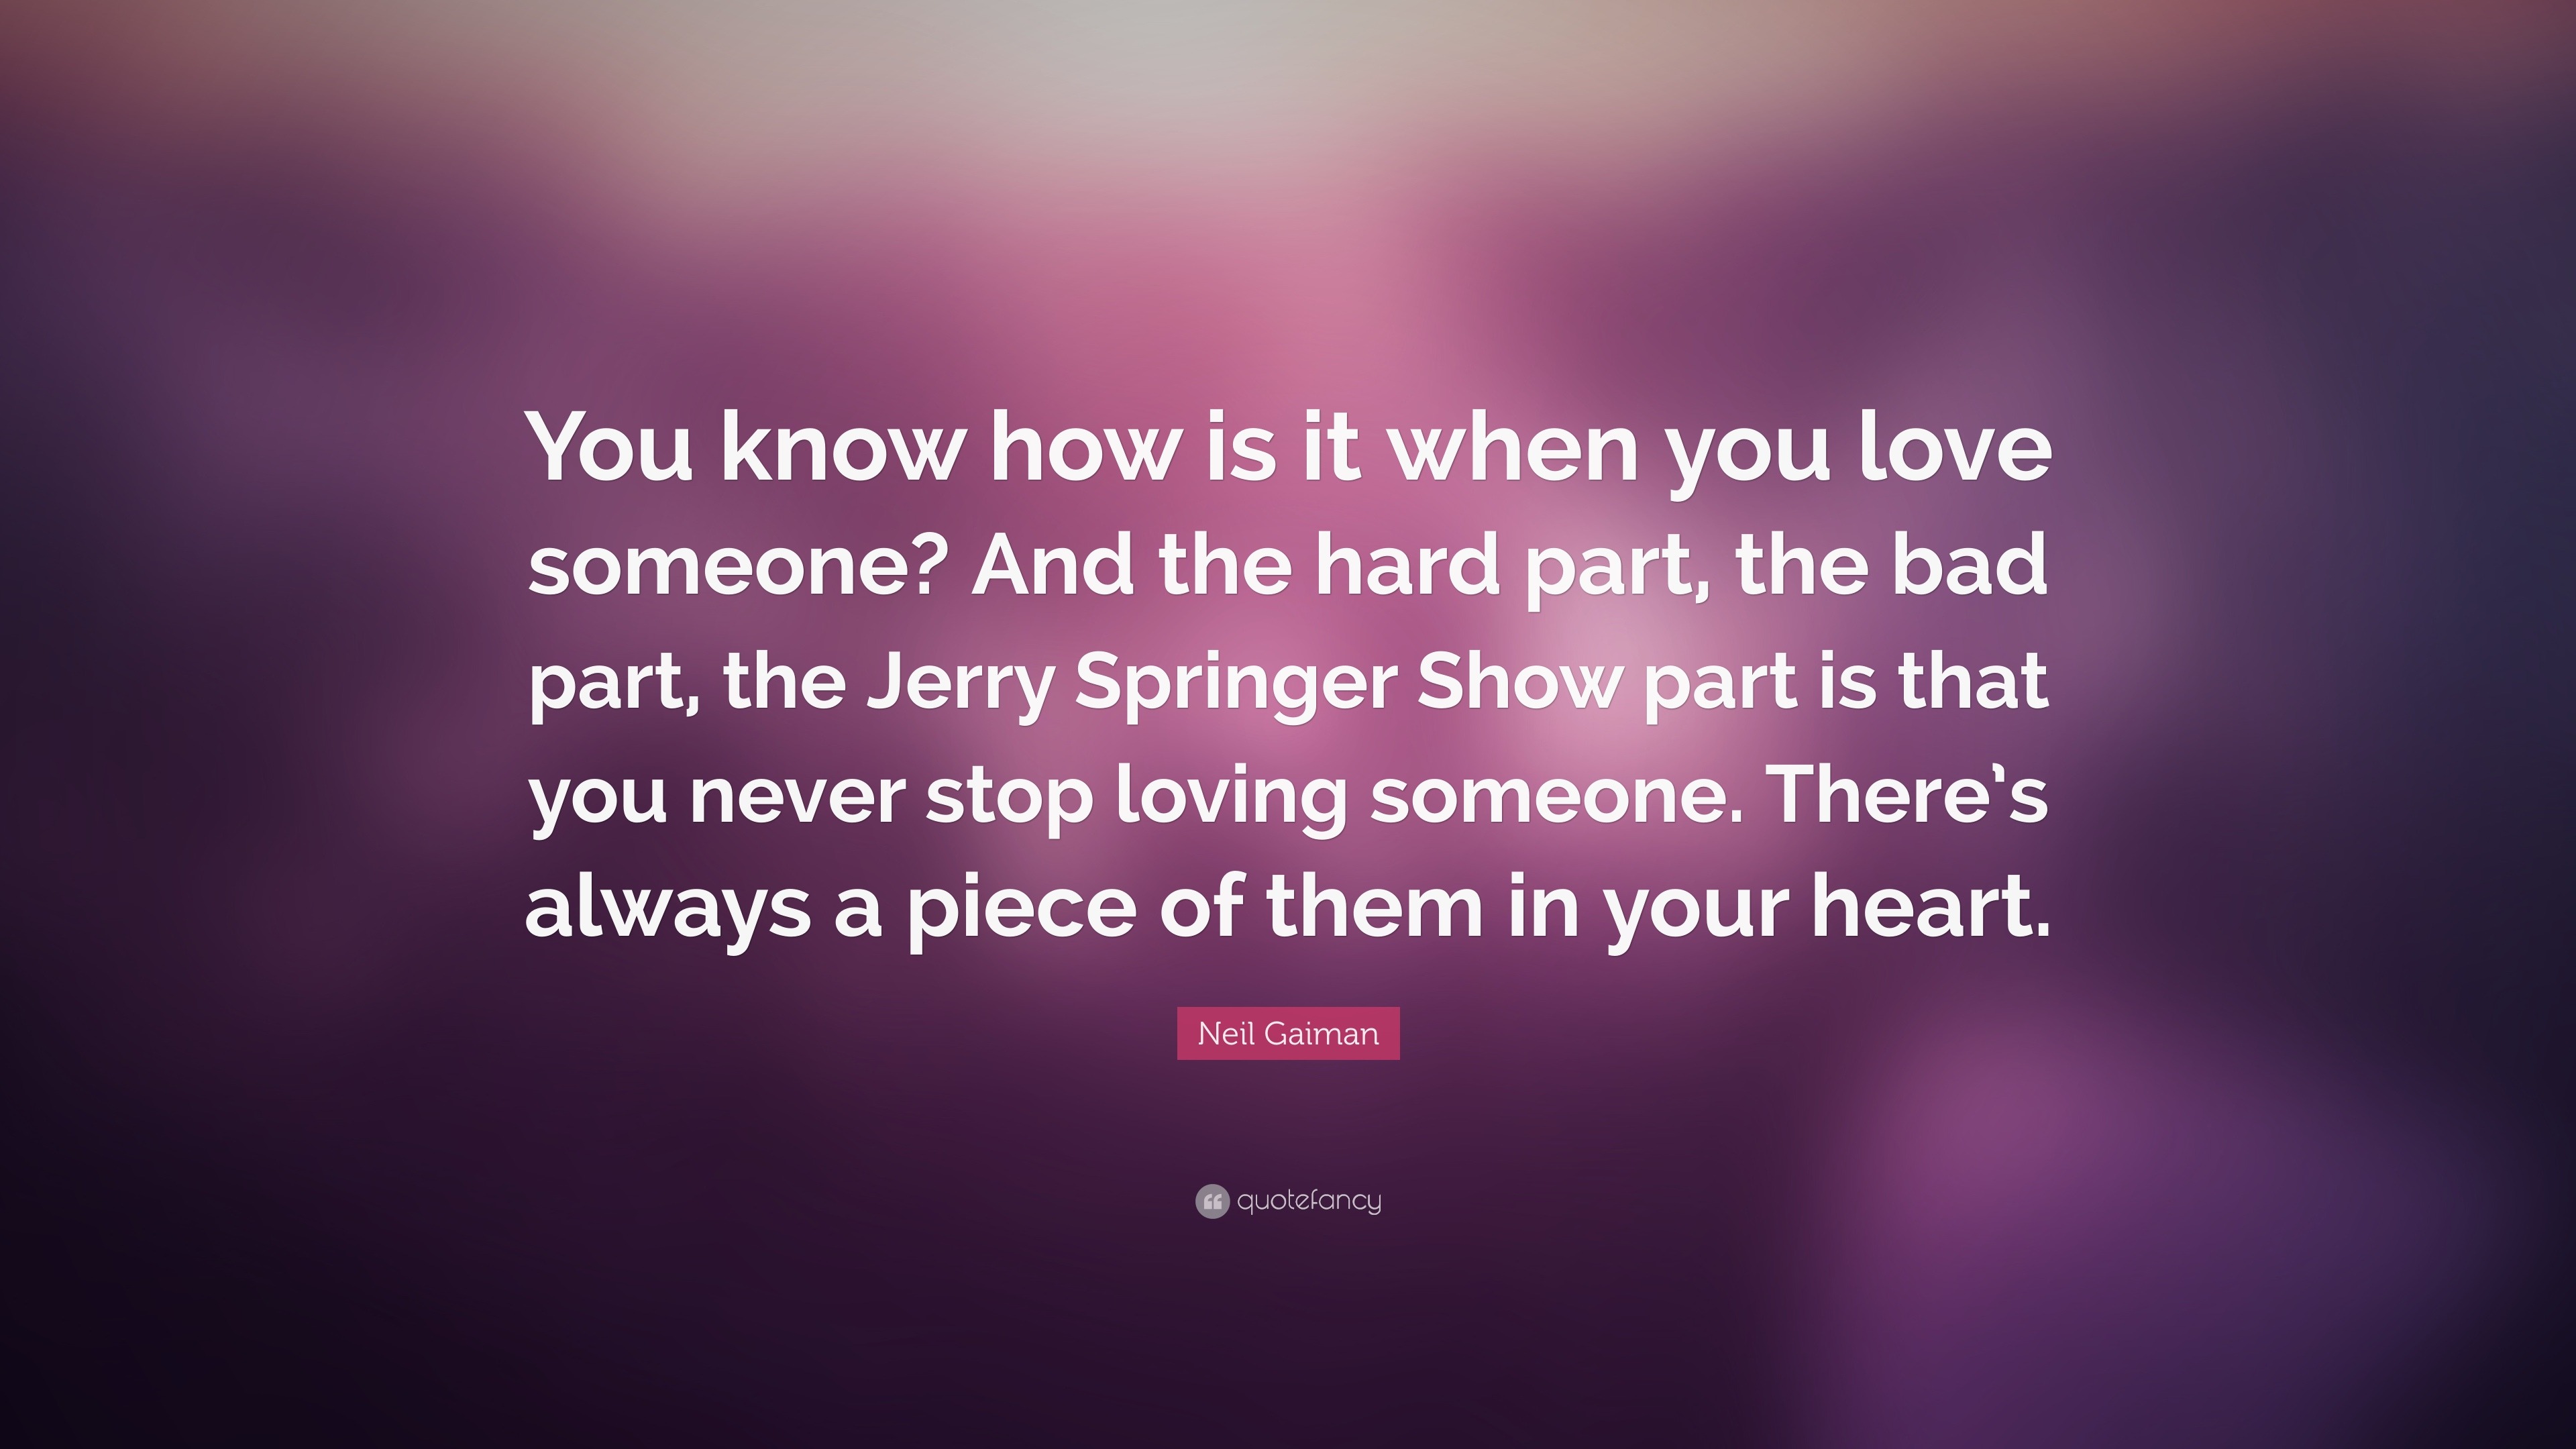 Neil Gaiman Quote “You know how is it when you love someone And